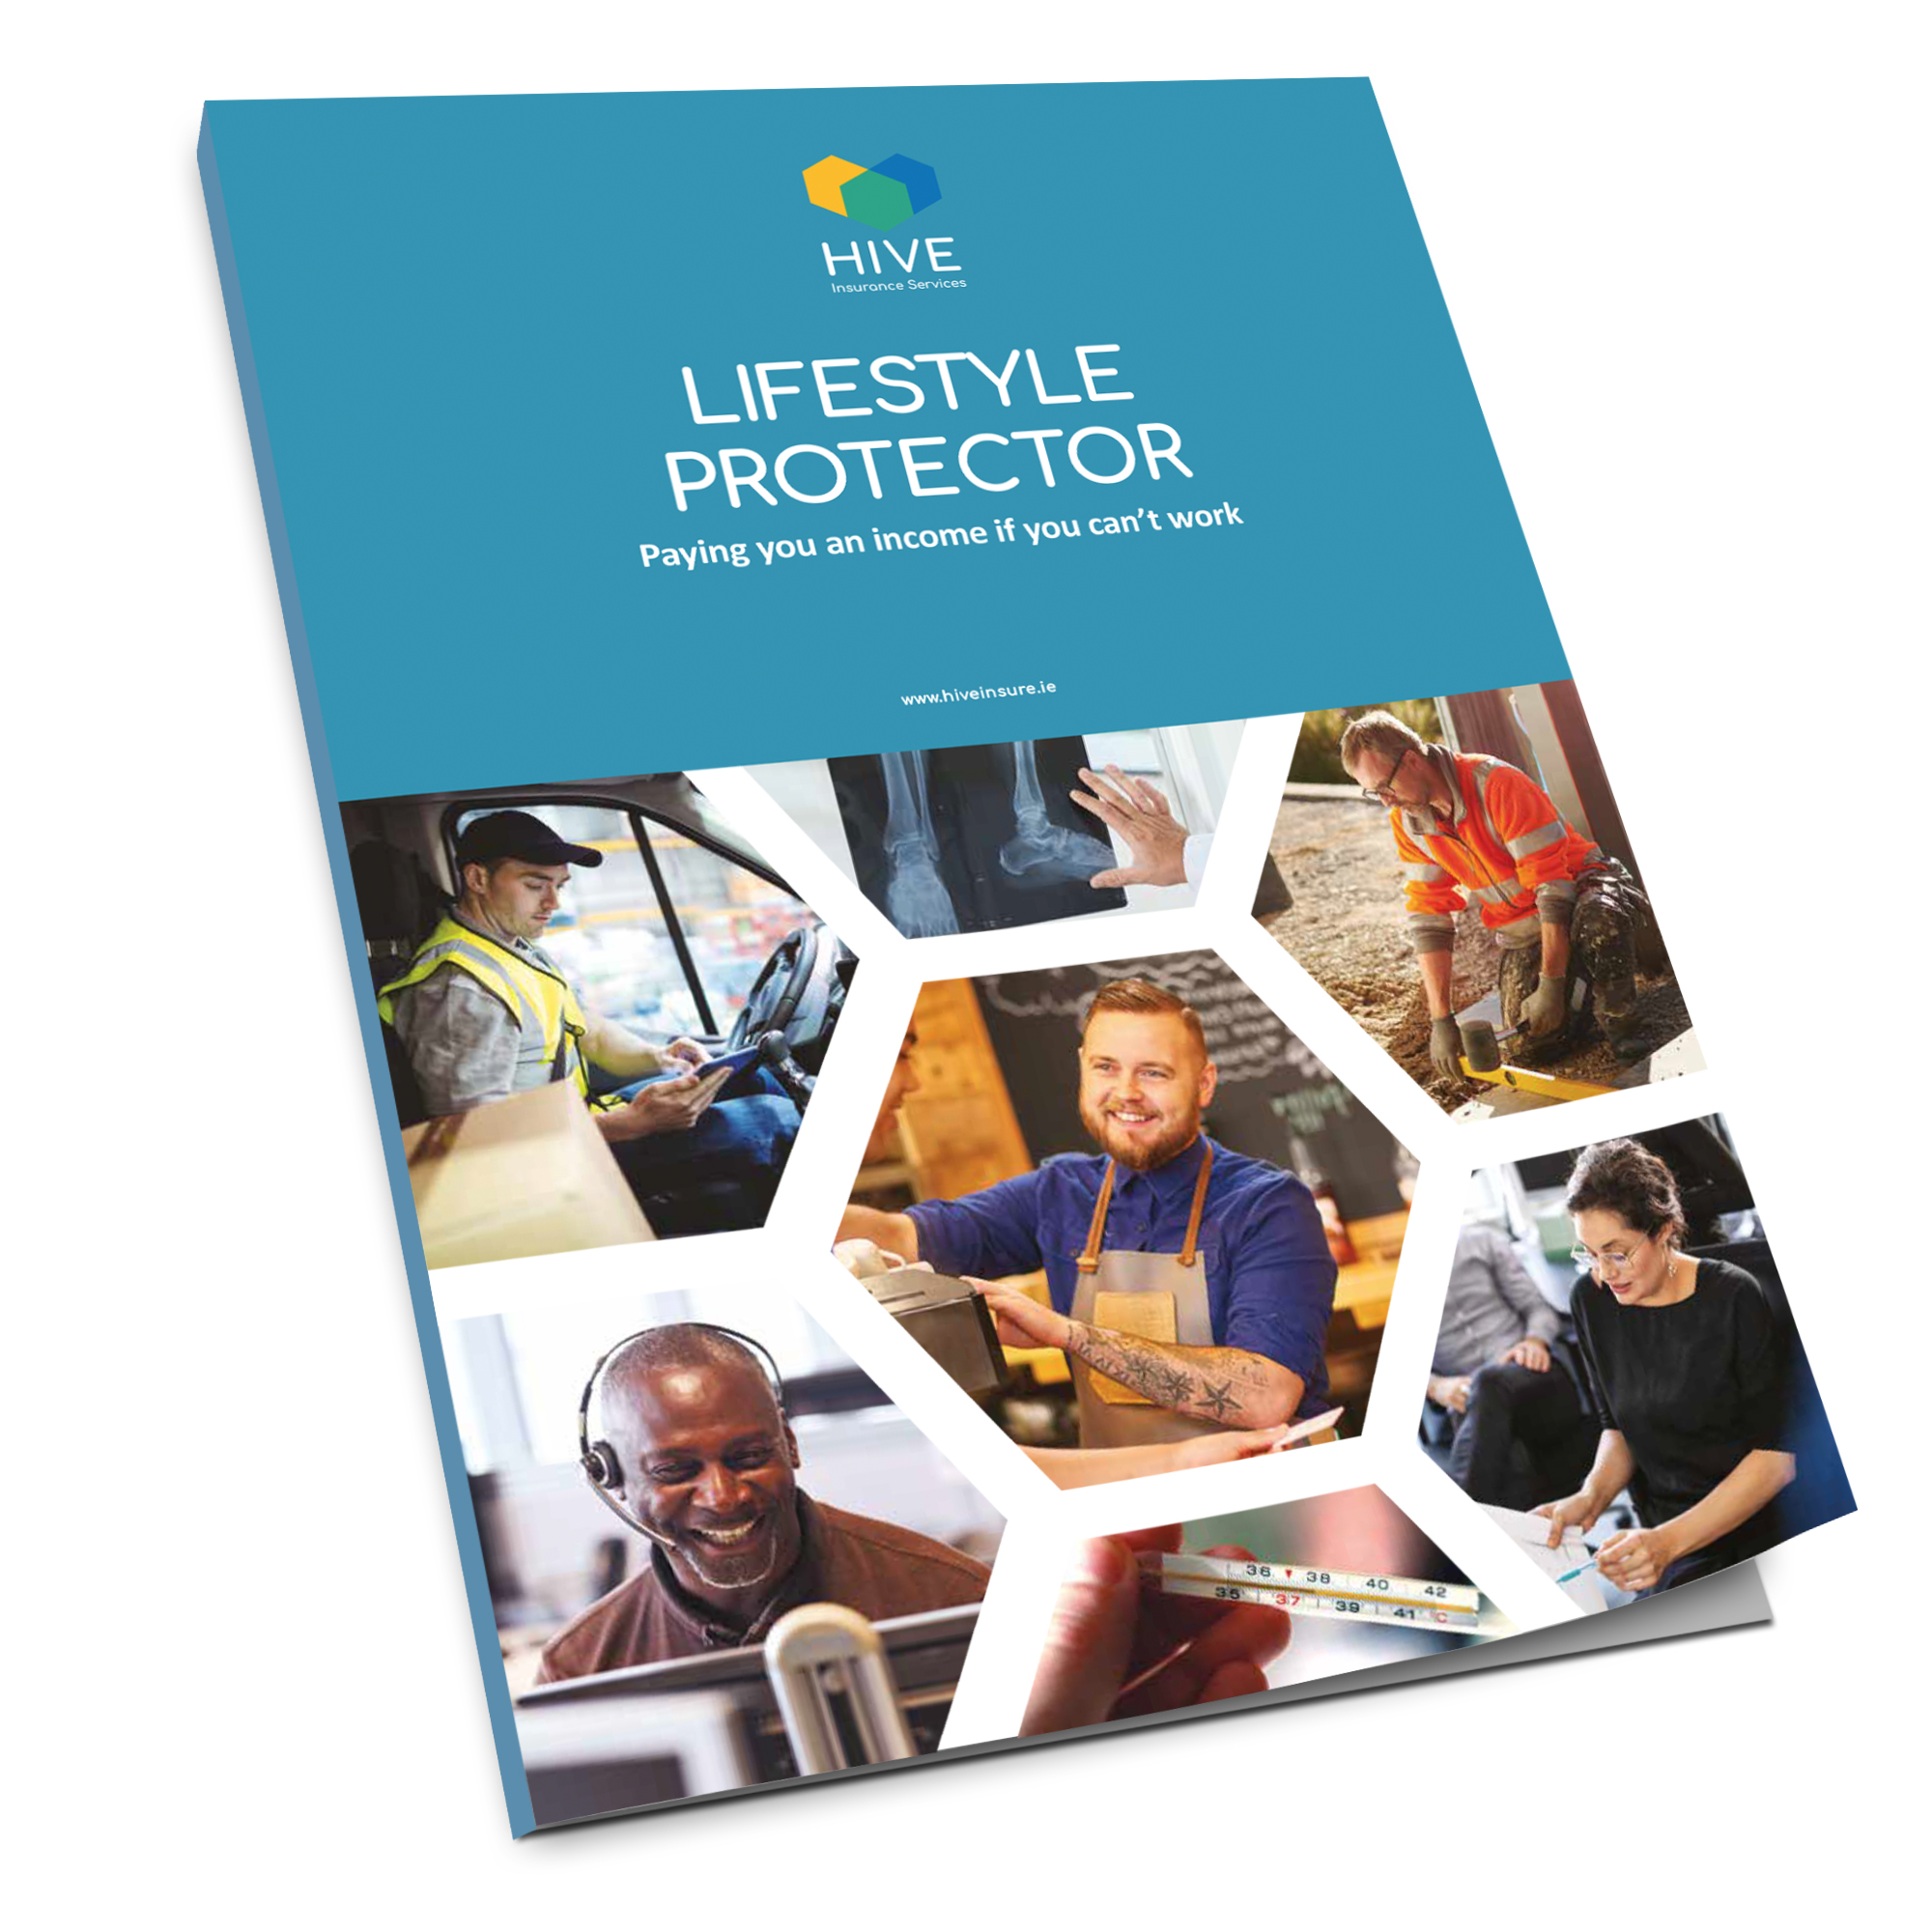 Lifestyle Protector guide cover